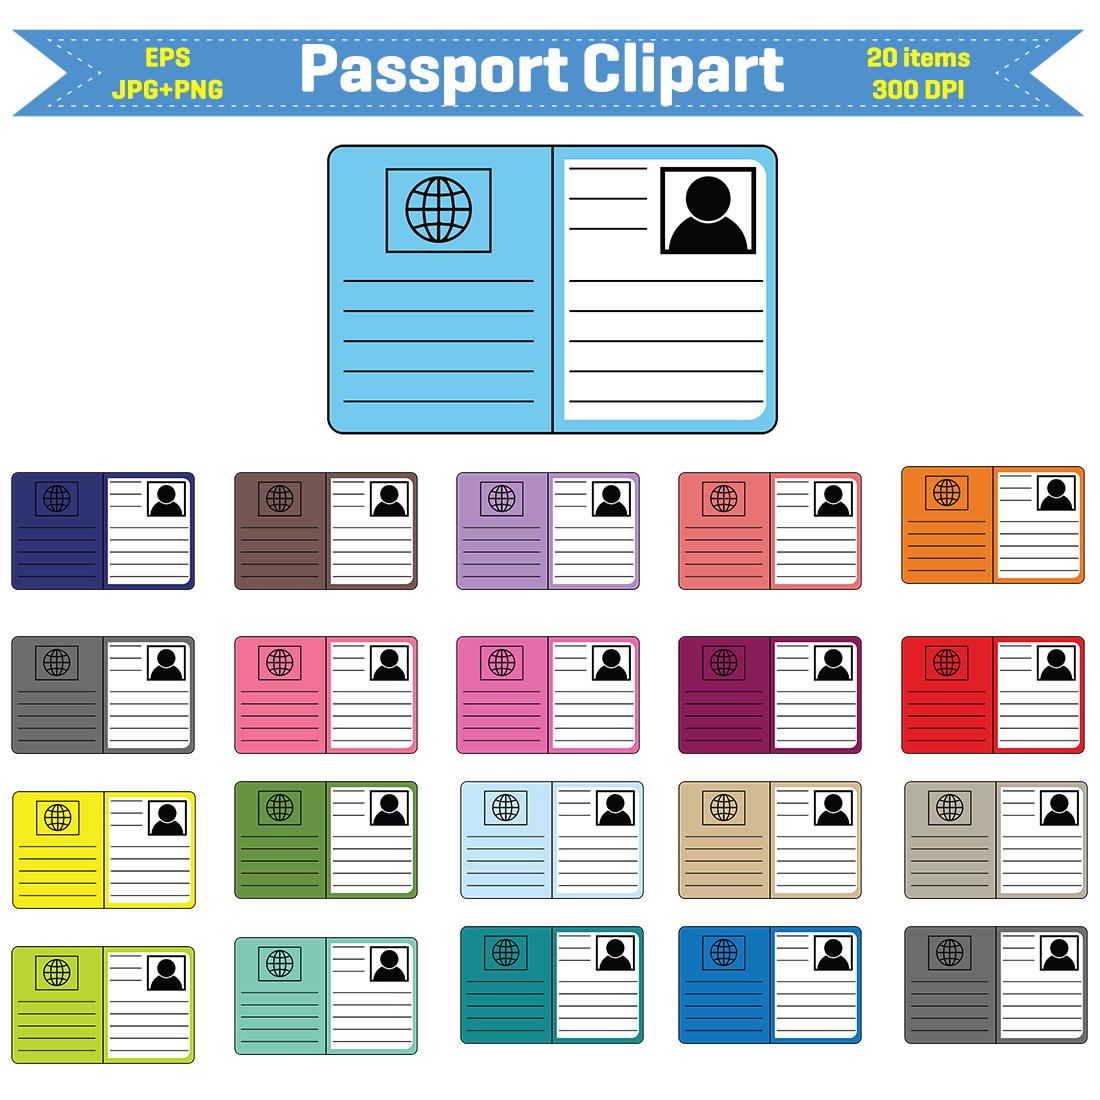 Passport Clipart cover image.